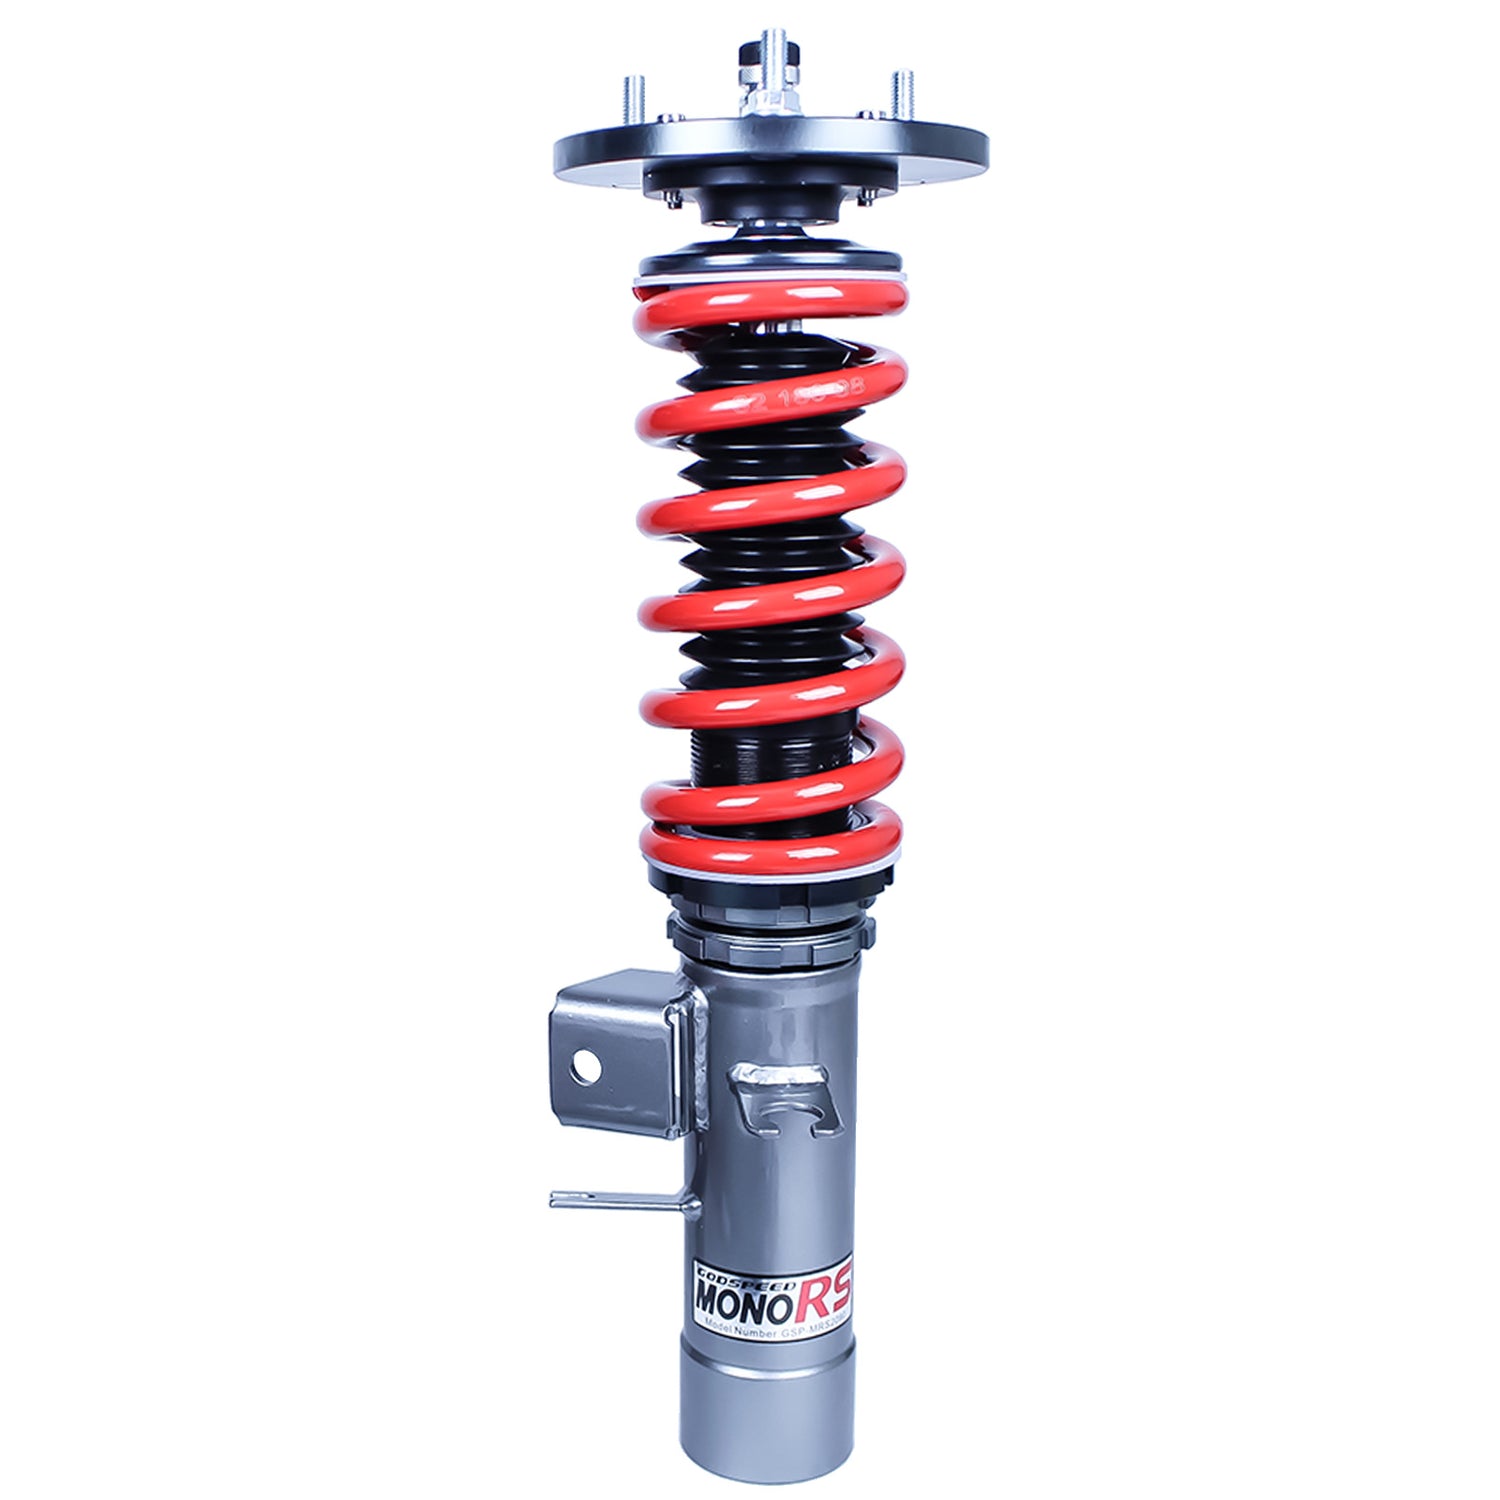 Godspeed(MRS2090) MonoRS Coilovers, BMW 5-Series(E34) 87-95, Fully Adjustable, Set of 4